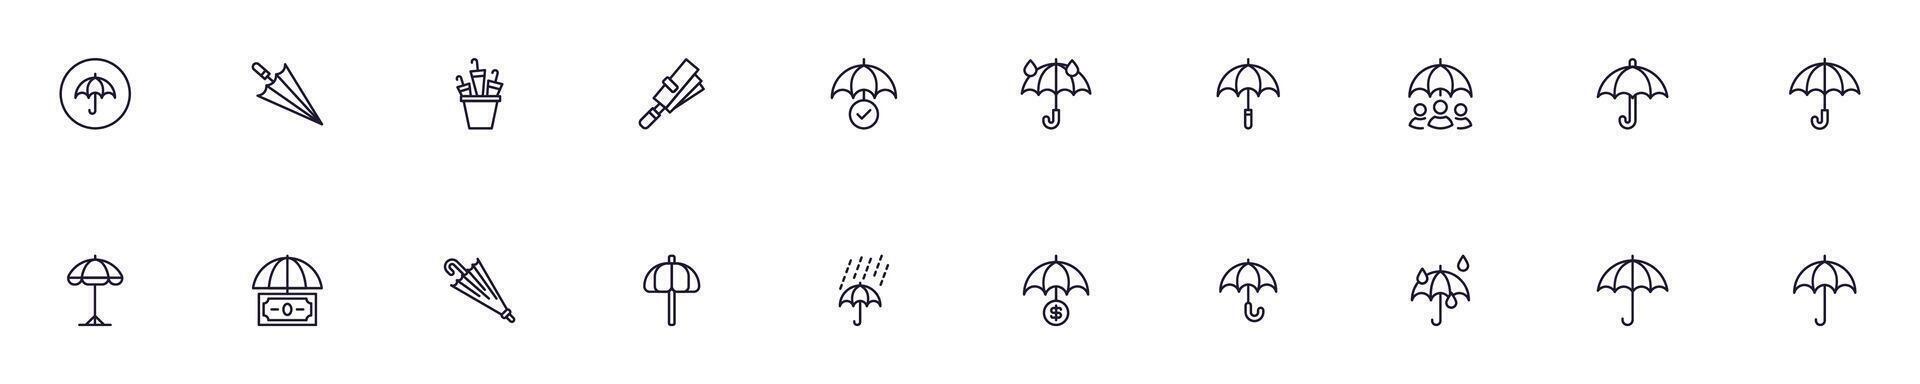 Umbrellas line vector pictograms pack. Editable stroke. Simple linear illustration that can be used as a design element for apps and websites